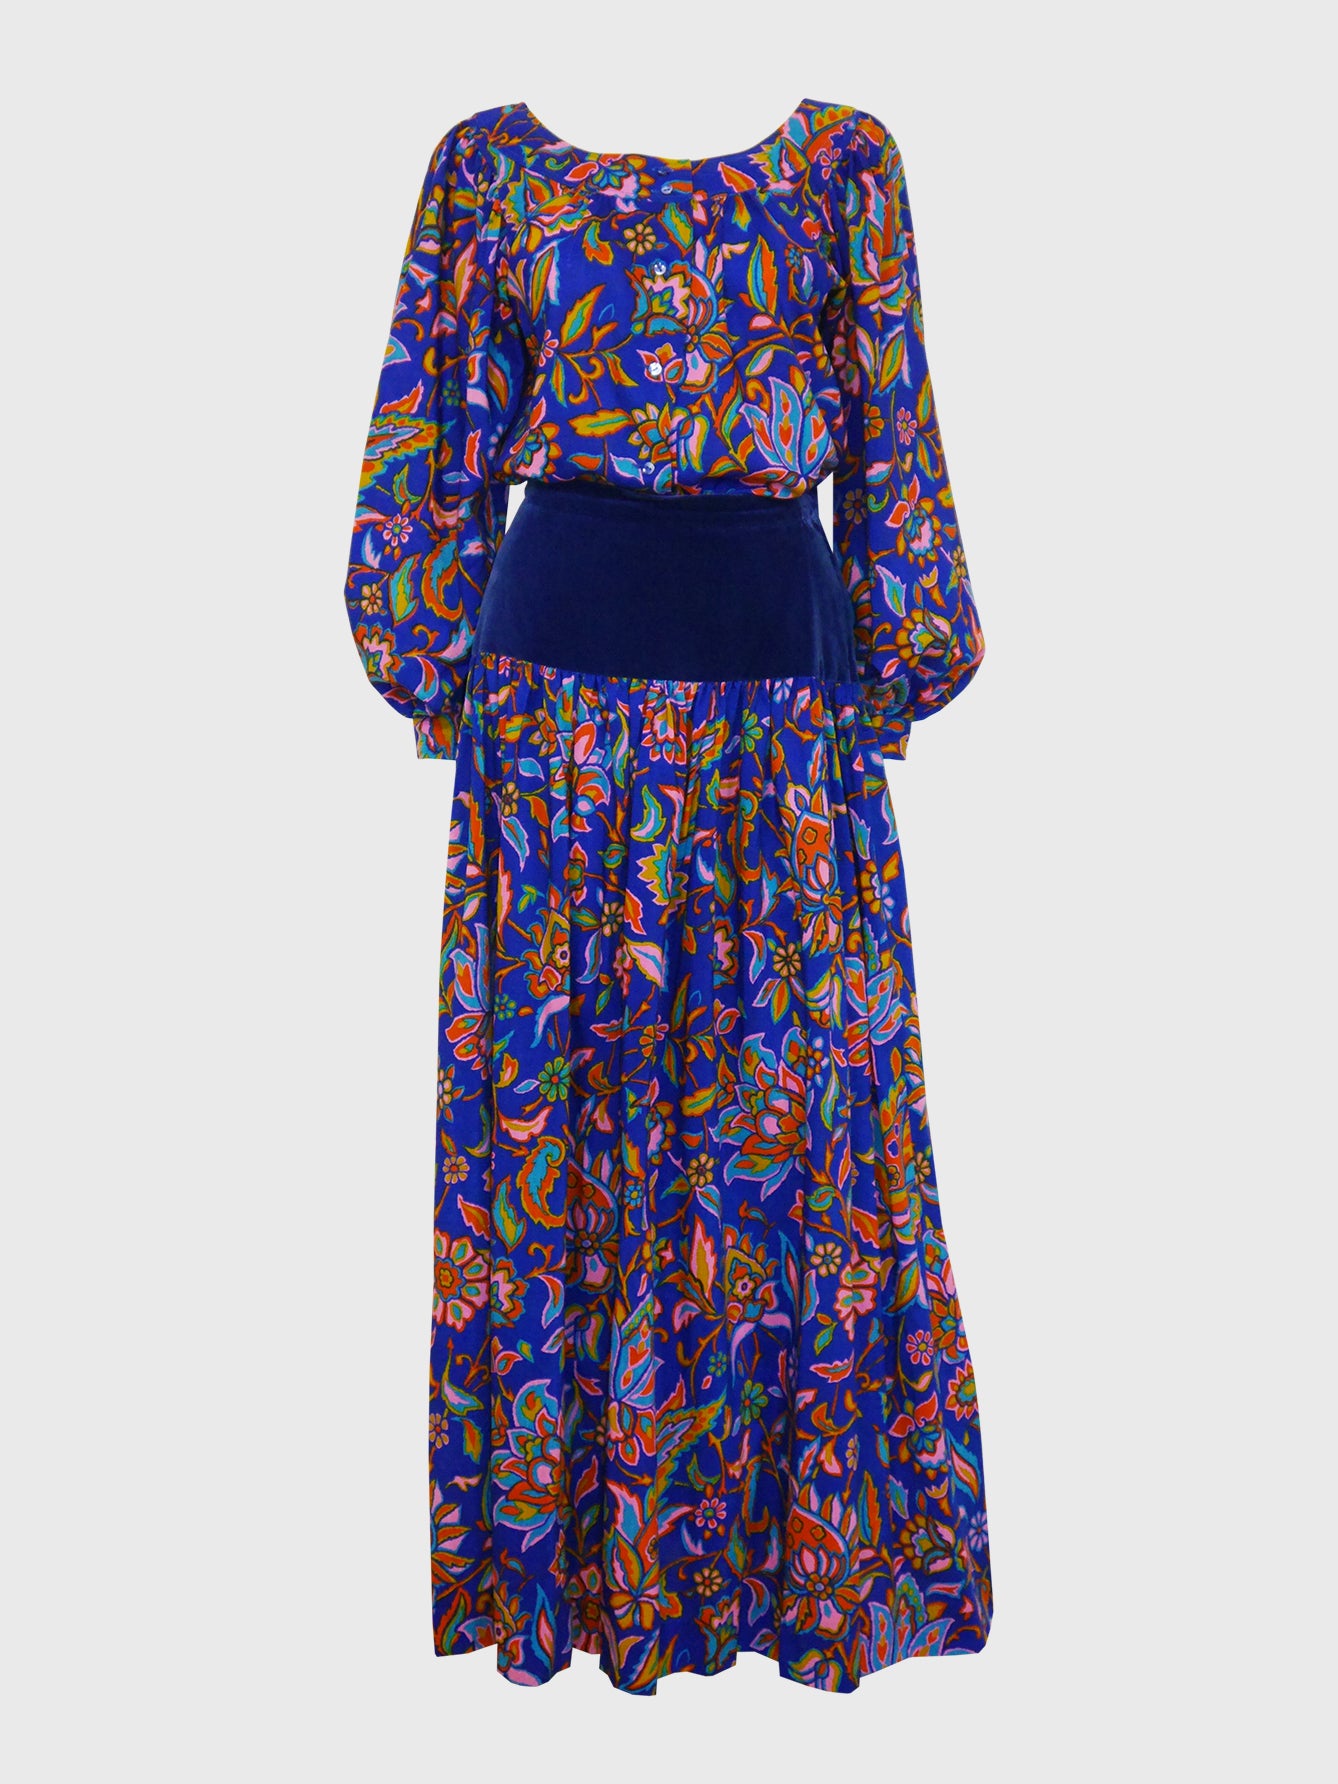 YVES SAINT LAURENT Fall 1976 Russian Collection Peasant Blouse & Maxi Skirt